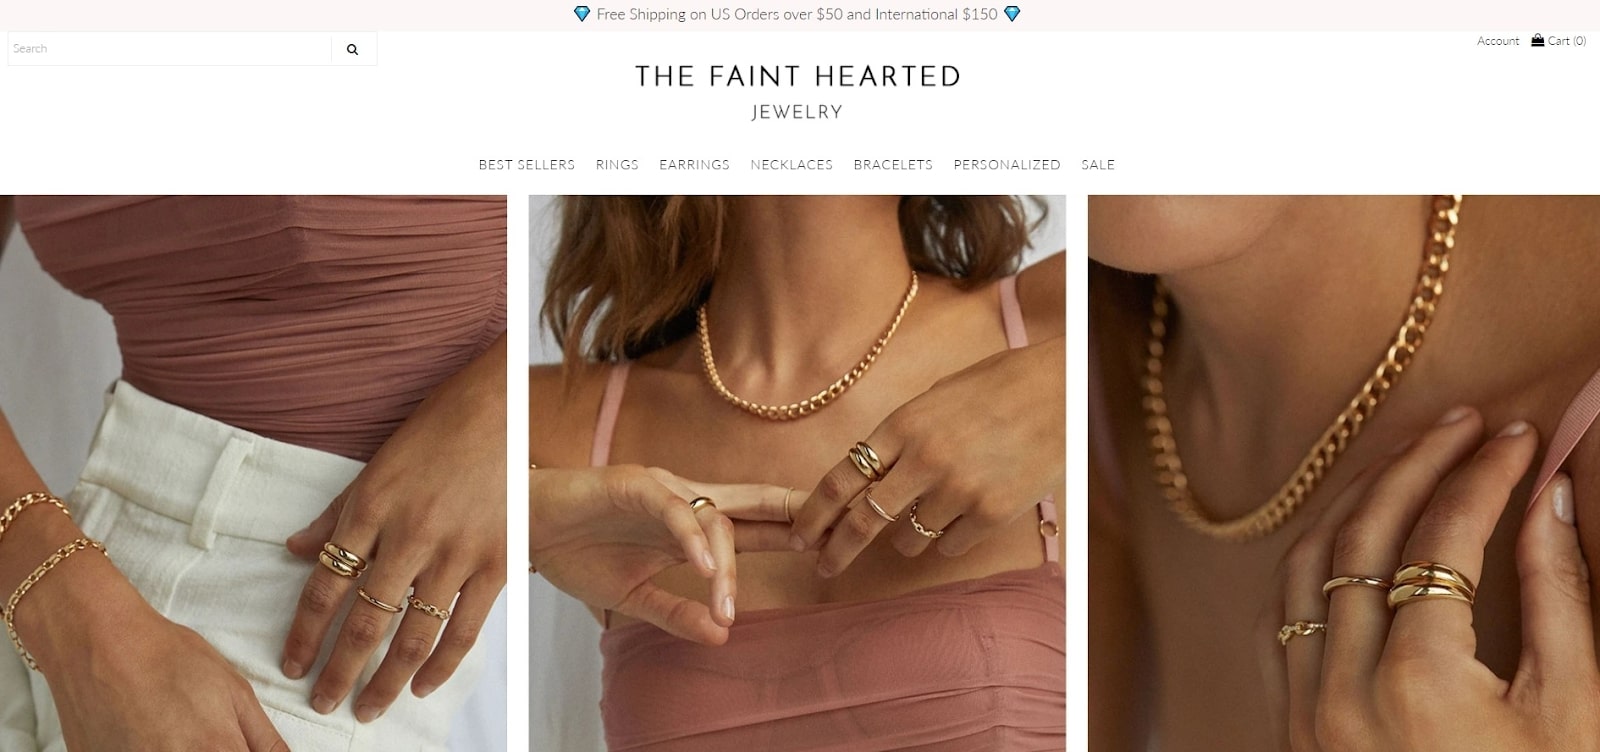 The Faint Hearted - Stylish jewelry store